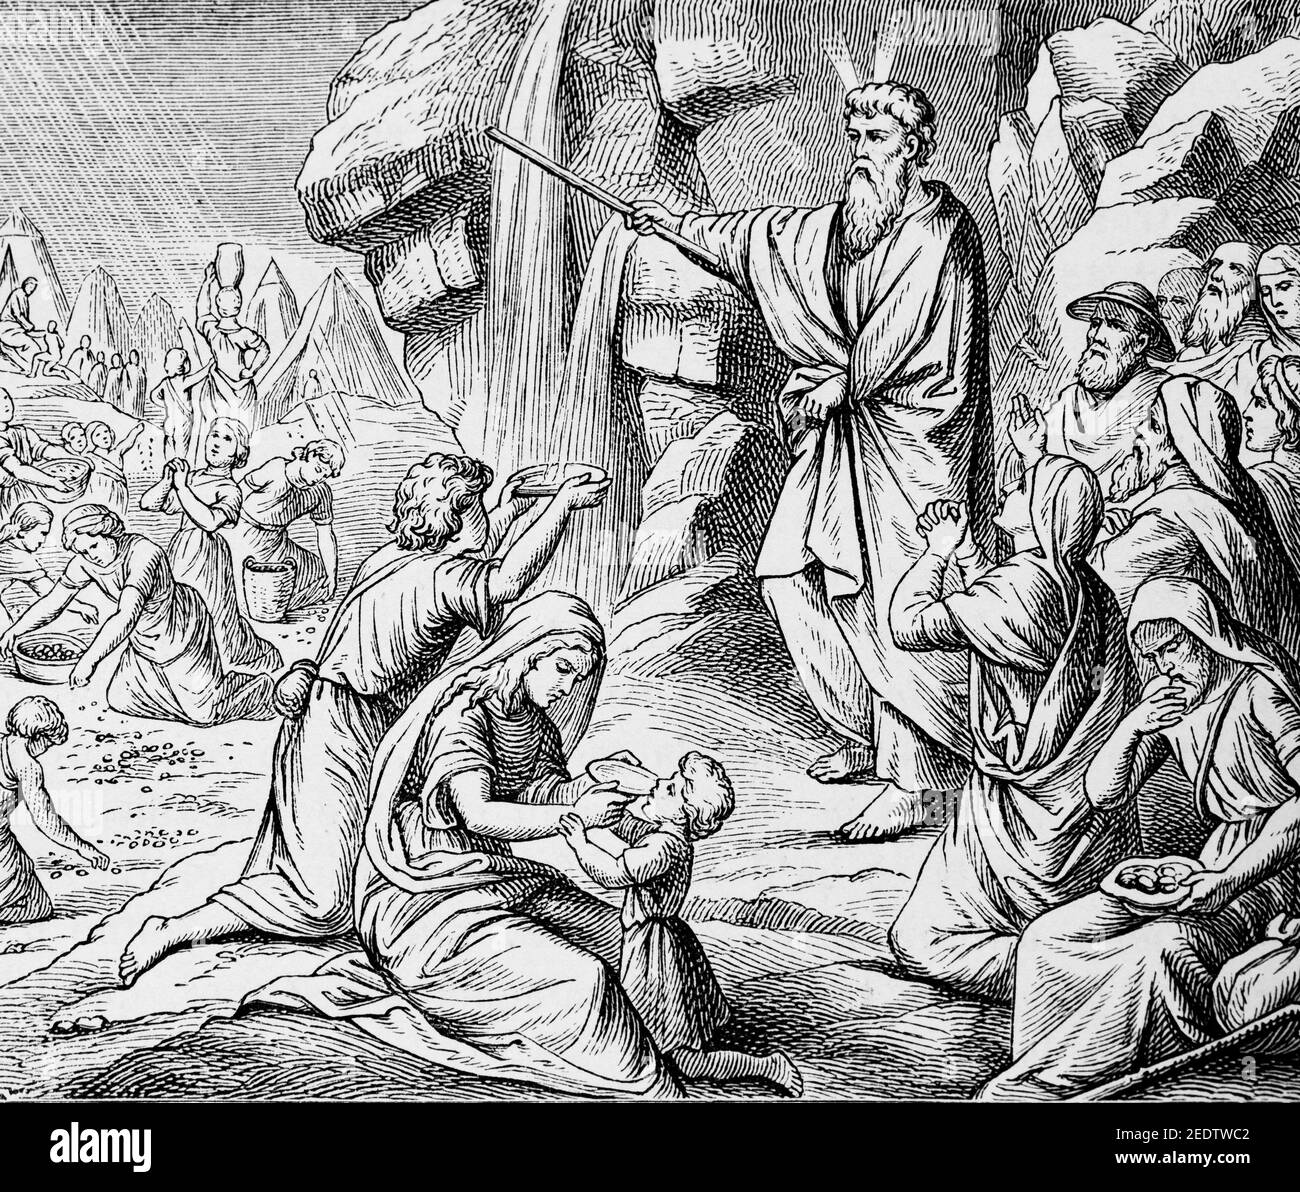 Wonders that God works in the desert, Moses stabbing the rock for water, Old Testament, Histoire Biblique de L´Ancien Testament, Fribourg, 1891 Stock Photo